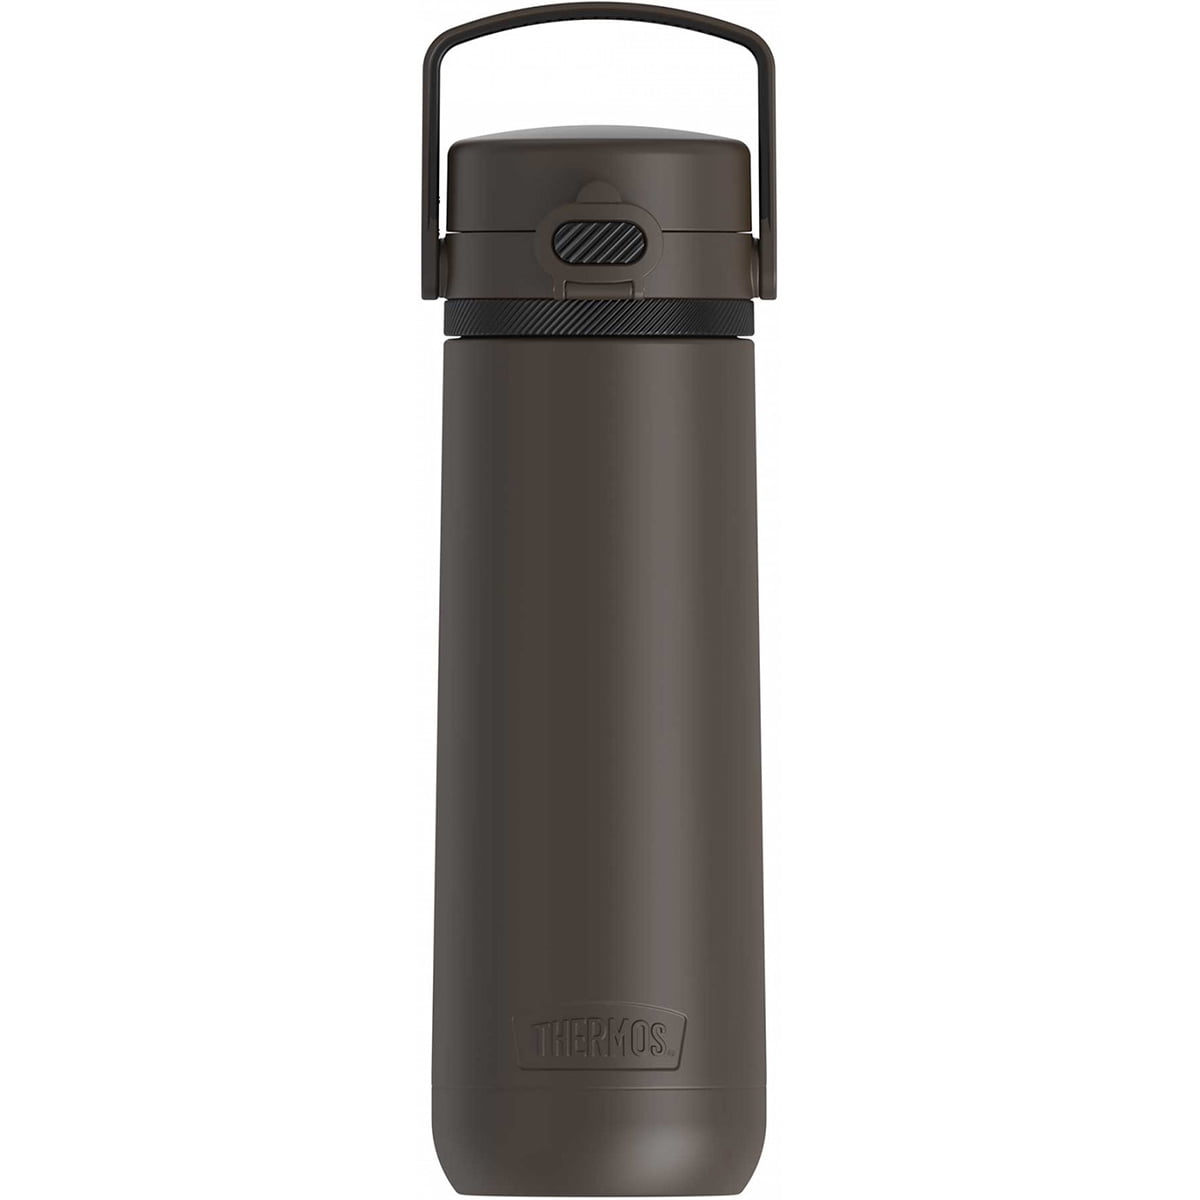 Thermos Direct Drink Bottle 16oz | Acton Coffee House